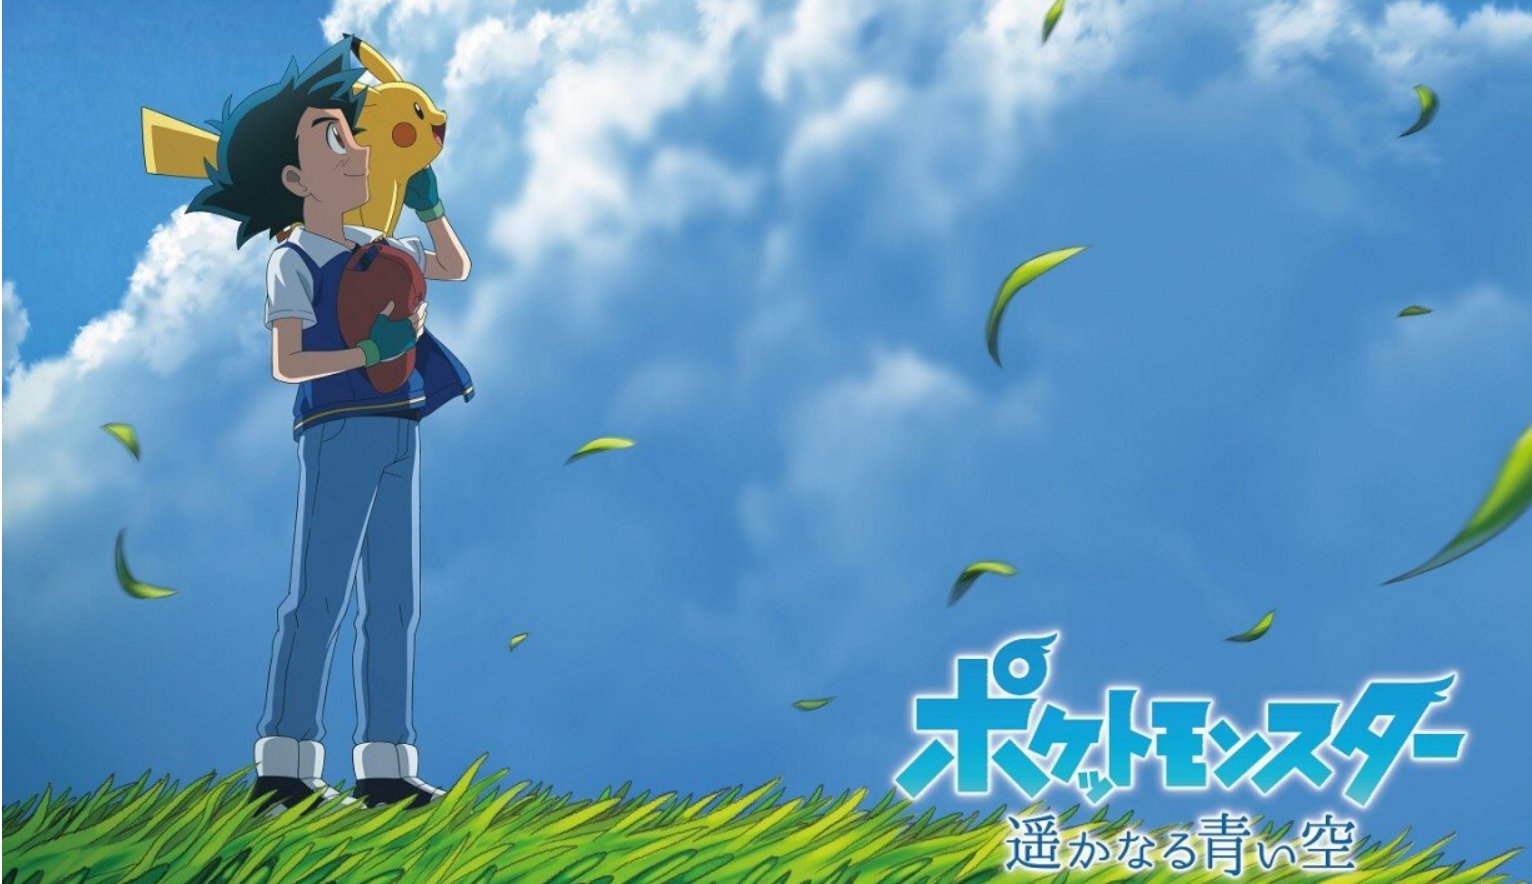 Pokemon anime to retire Ash and Pikachu as central characters, new series  to begin soon- Cinema express